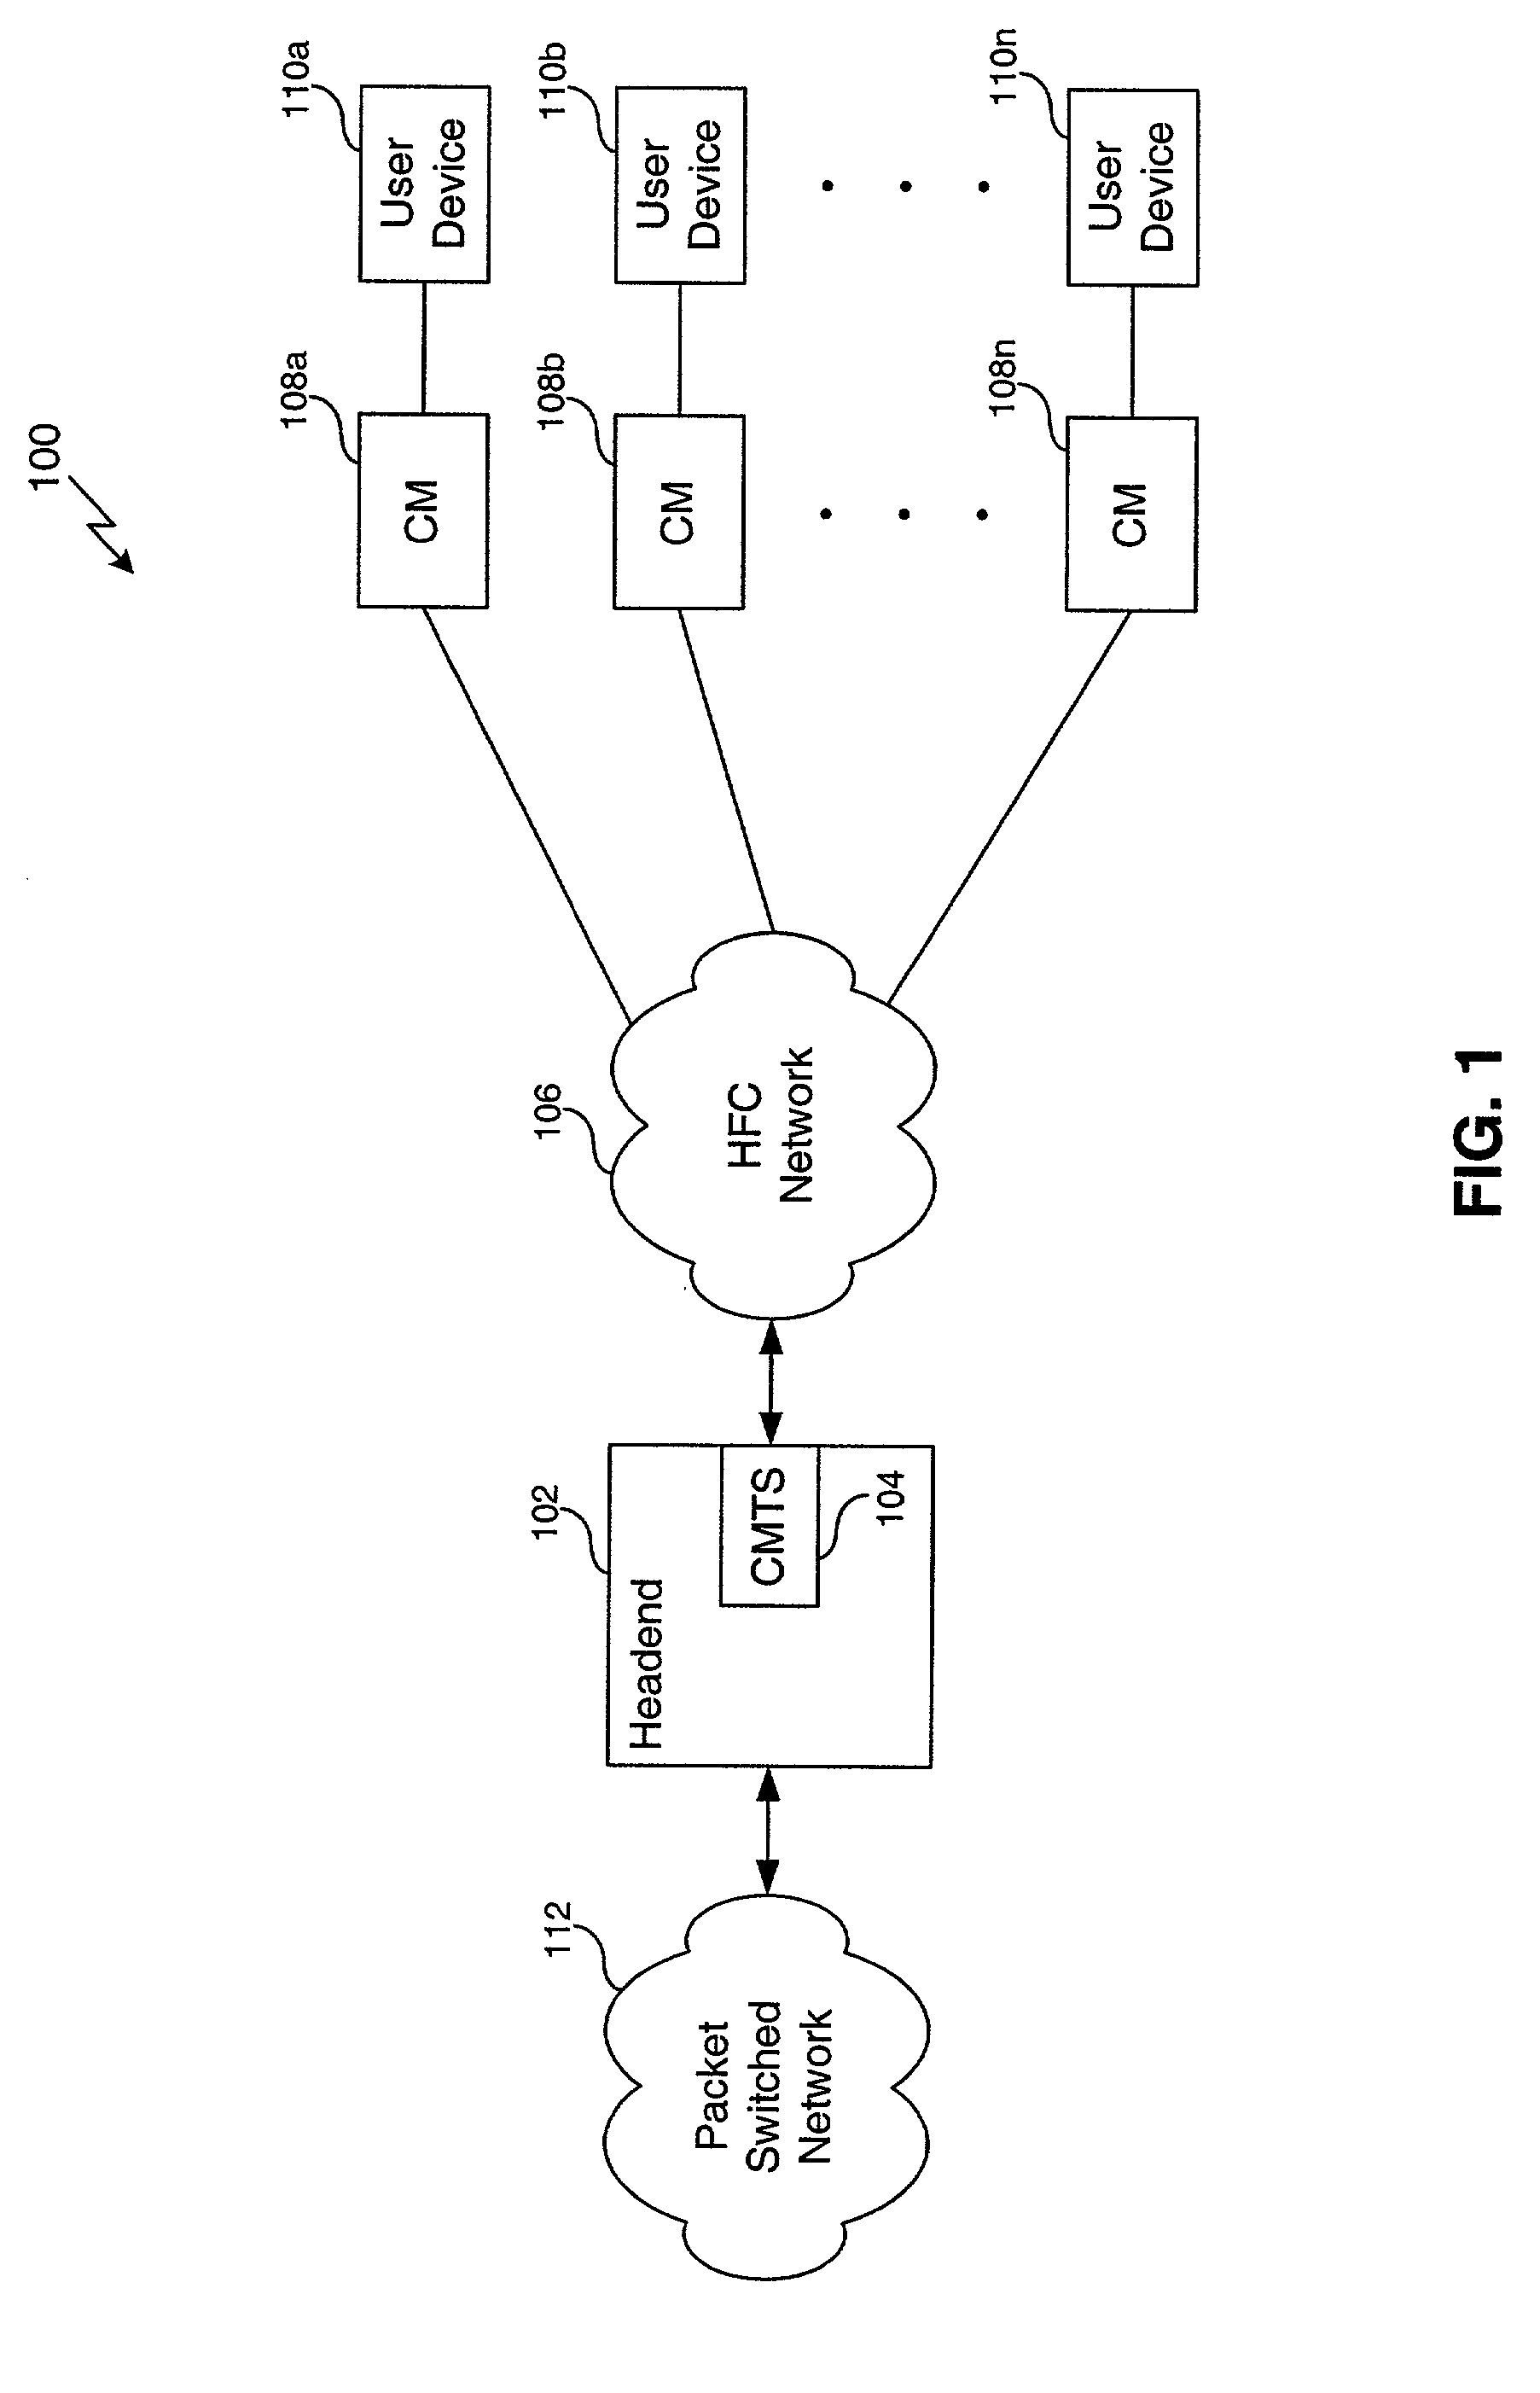 FEC block reconstruction system, method and computer program product for mitigating burst noise in a communications system